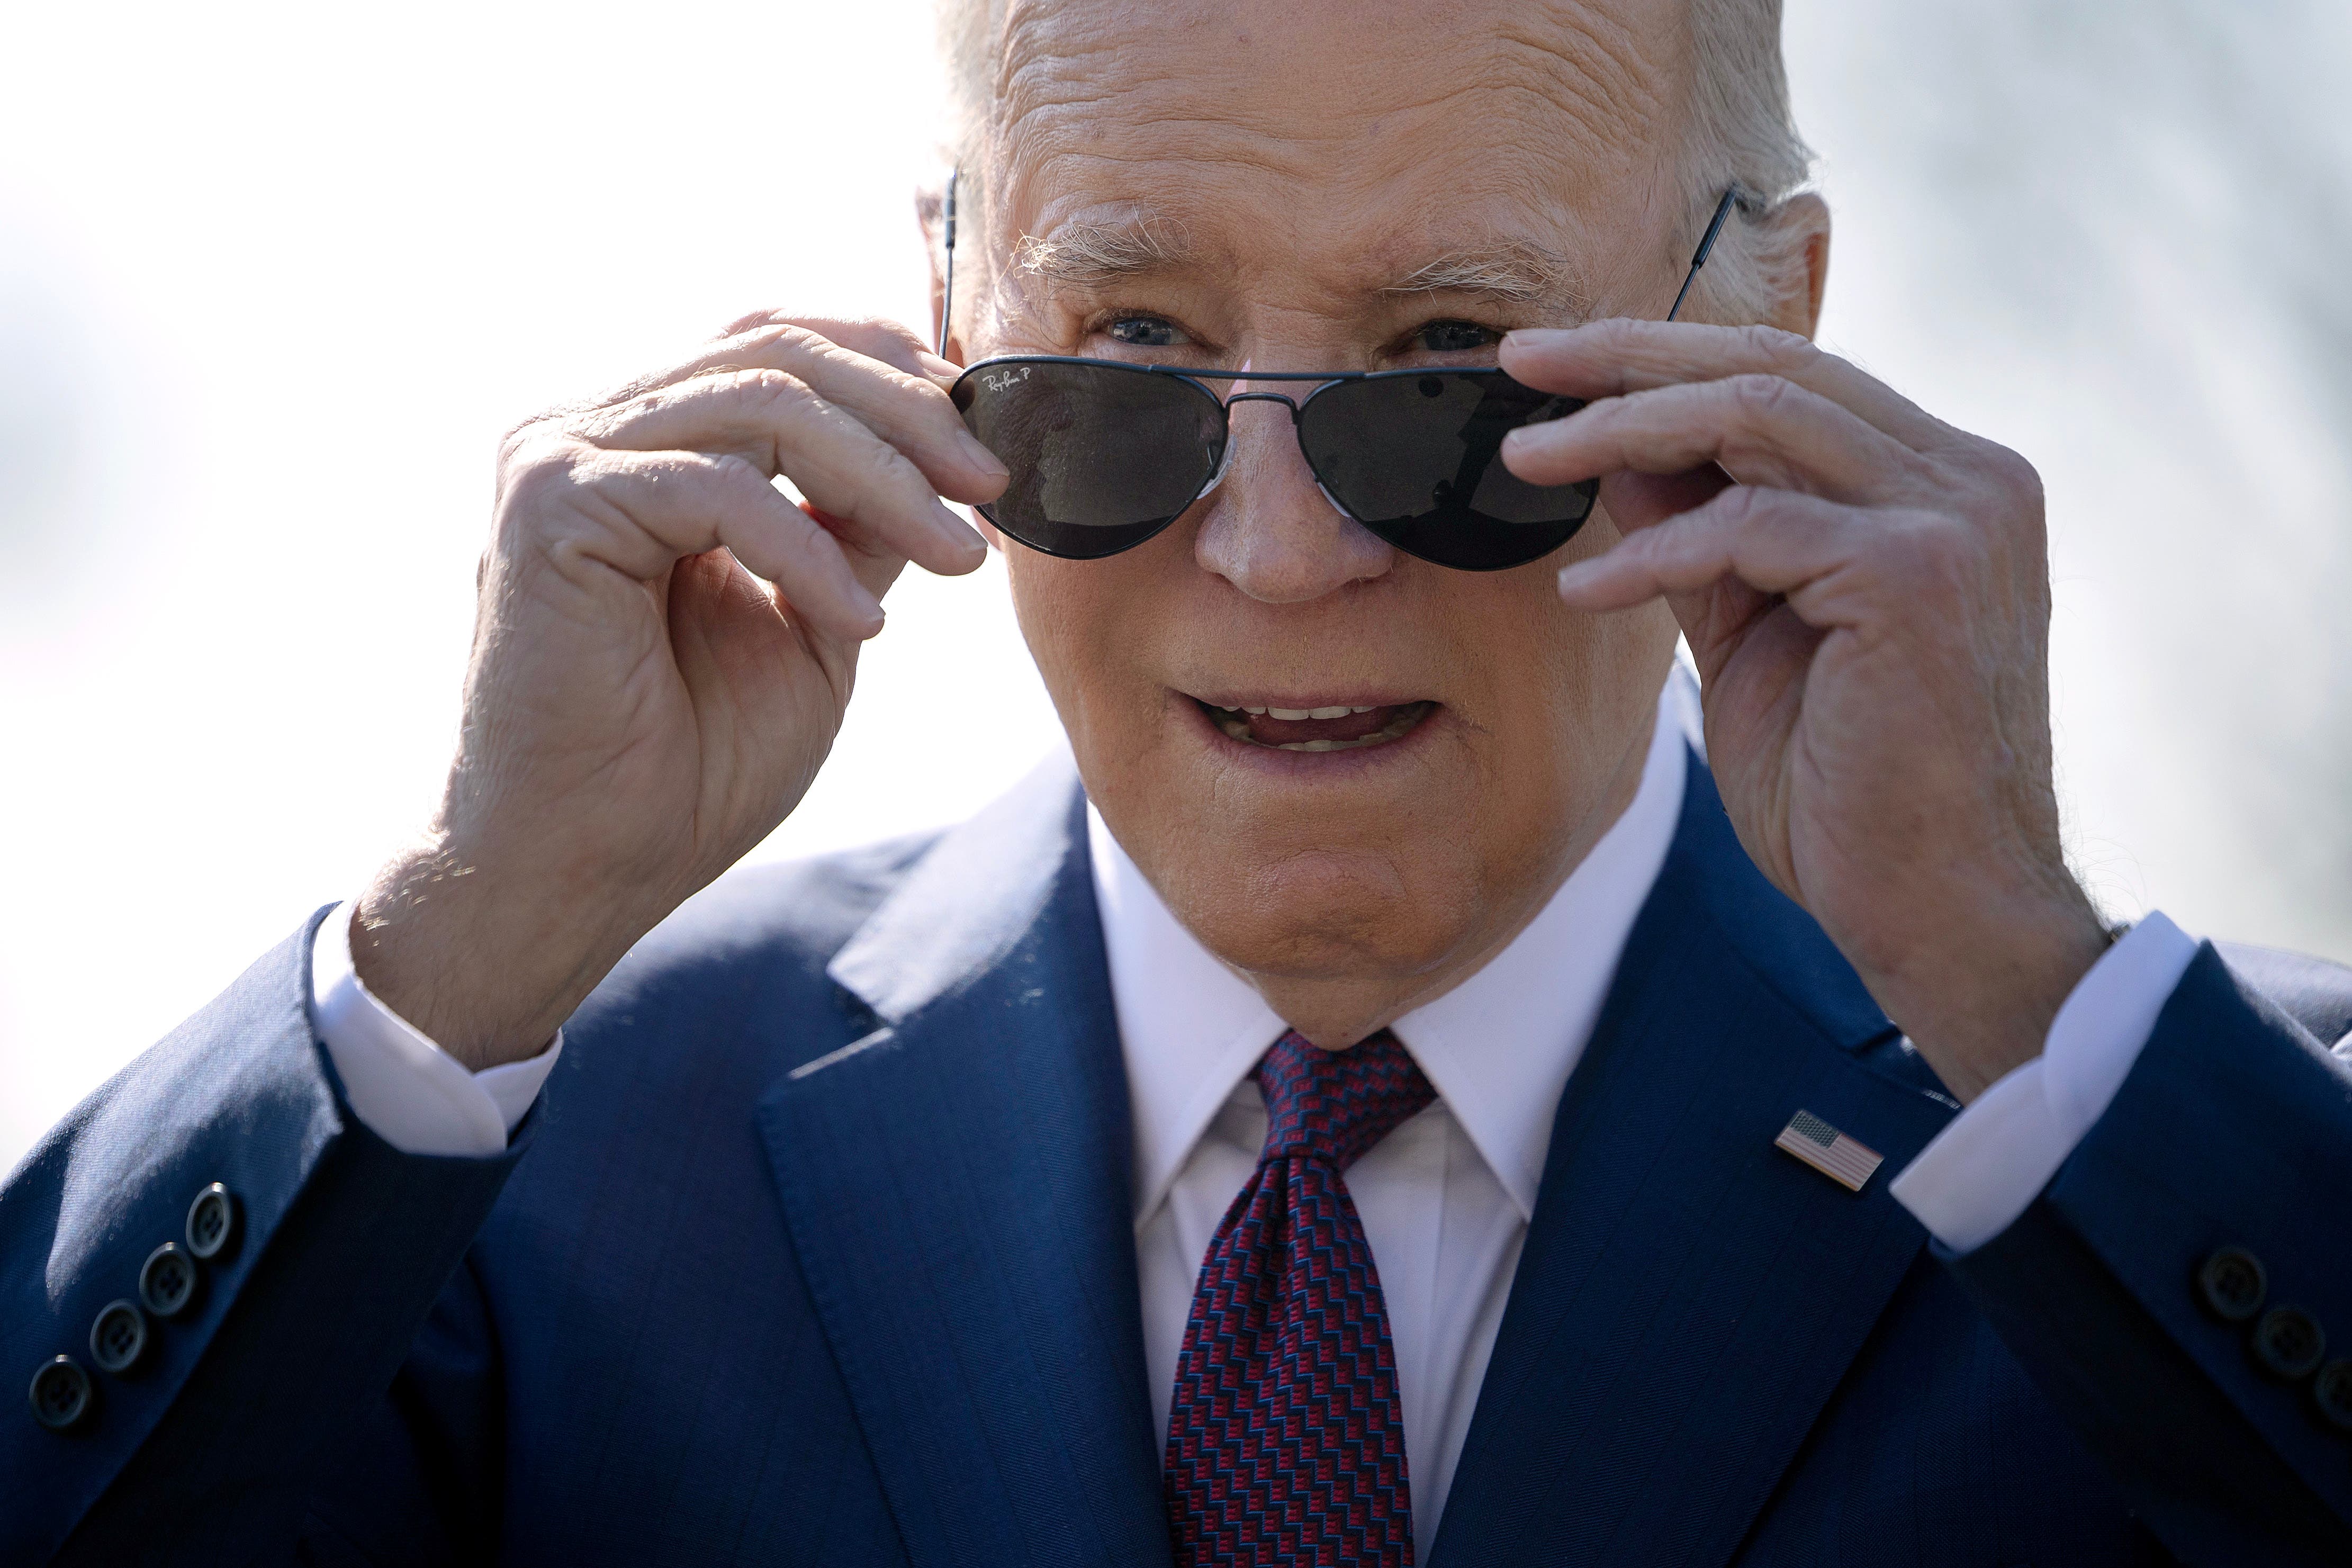 Biden has told campaign to highlight the ‘crazy s***’ Trump says